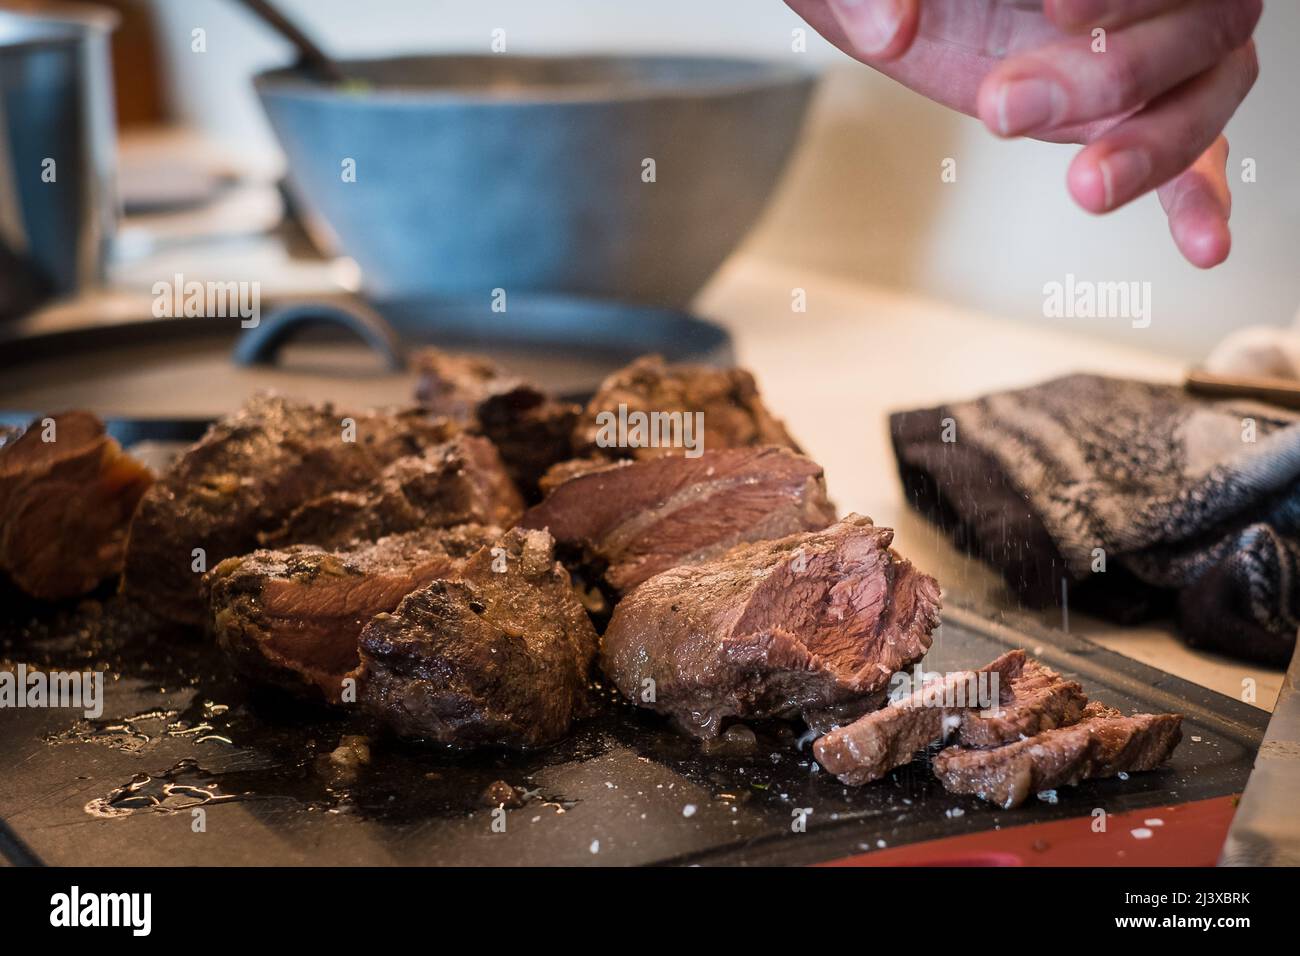 Salt falling on braised beef cheeks cooked in red wine sauce on cutting board. Slow cooked meat stew. Stock Photo